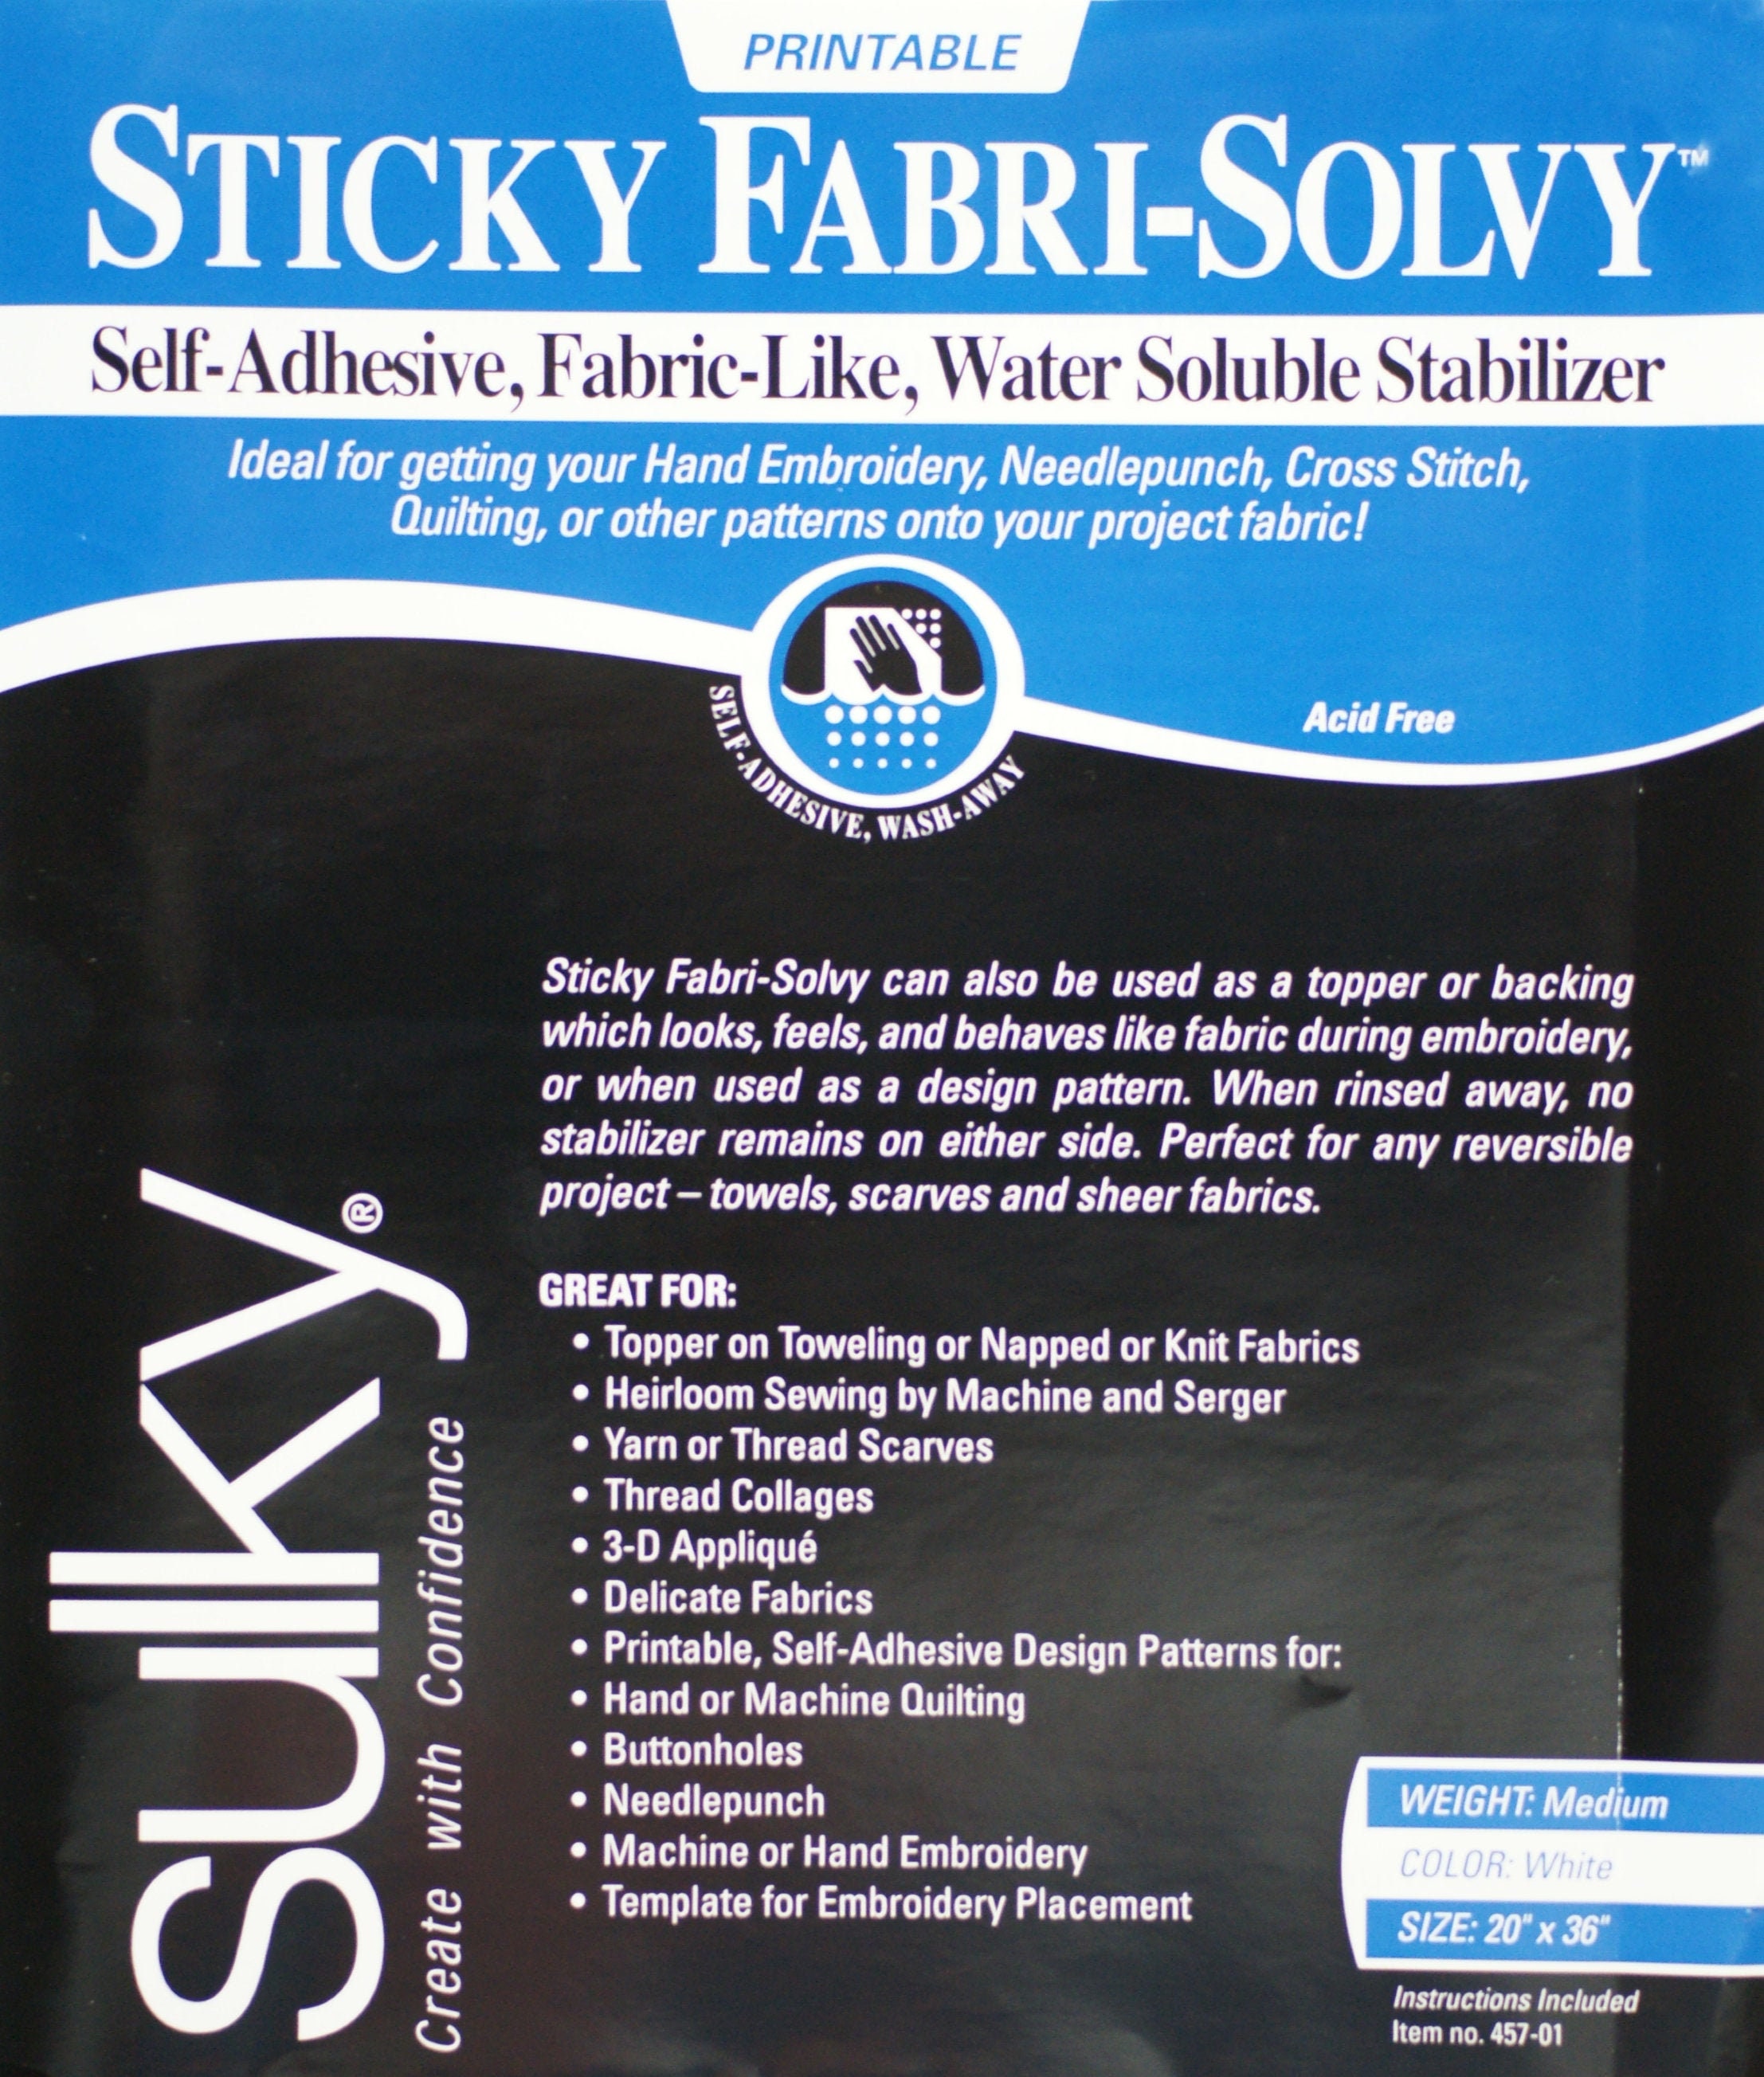 Sulky® Sticky Fabri-Solvy™ Printable Water-Soluble Stabilizer, 20